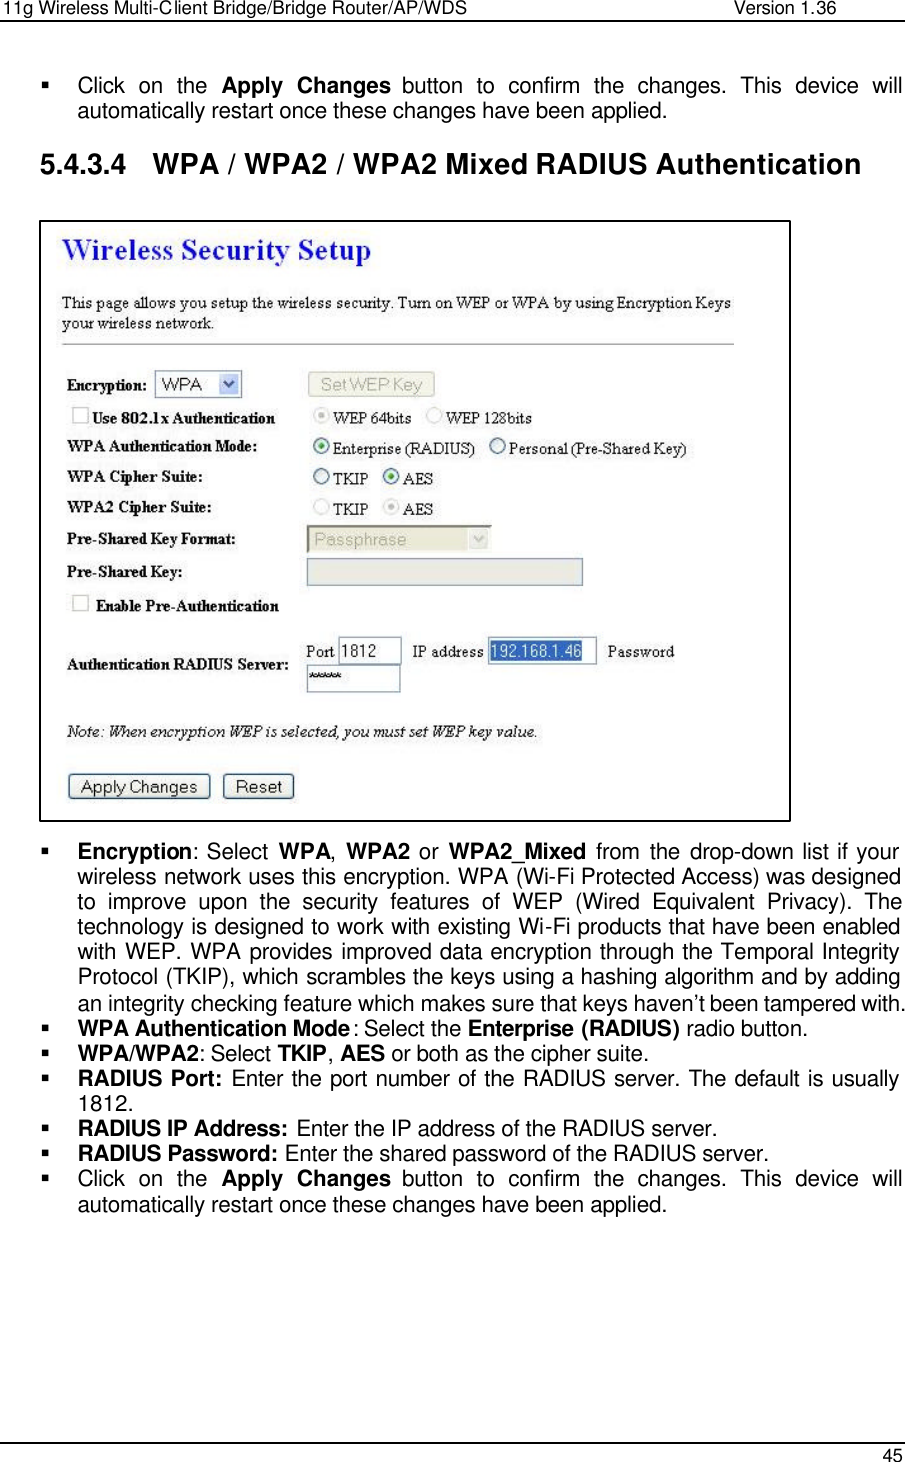 11g Wireless Multi-Client Bridge/Bridge Router/AP/WDS                                                   Version 1.36    45  § Click on the Apply Changes button to confirm the changes. This device will automatically restart once these changes have been applied.   5.4.3.4 WPA / WPA2 / WPA2 Mixed RADIUS Authentication                           § Encryption: Select WPA,  WPA2 or  WPA2_Mixed from the drop-down list if your wireless network uses this encryption. WPA (Wi-Fi Protected Access) was designed to improve upon the security features of WEP (Wired Equivalent Privacy). The technology is designed to work with existing Wi-Fi products that have been enabled with WEP. WPA provides improved data encryption through the Temporal Integrity Protocol (TKIP), which scrambles the keys using a hashing algorithm and by adding an integrity checking feature which makes sure that keys haven’t been tampered with.  § WPA Authentication Mode: Select the Enterprise (RADIUS) radio button.  § WPA/WPA2: Select TKIP, AES or both as the cipher suite.  § RADIUS Port: Enter the port number of the RADIUS server. The default is usually 1812. § RADIUS IP Address: Enter the IP address of the RADIUS server.  § RADIUS Password: Enter the shared password of the RADIUS server.  § Click on the Apply Changes button to confirm the changes. This device will automatically restart once these changes have been applied.      